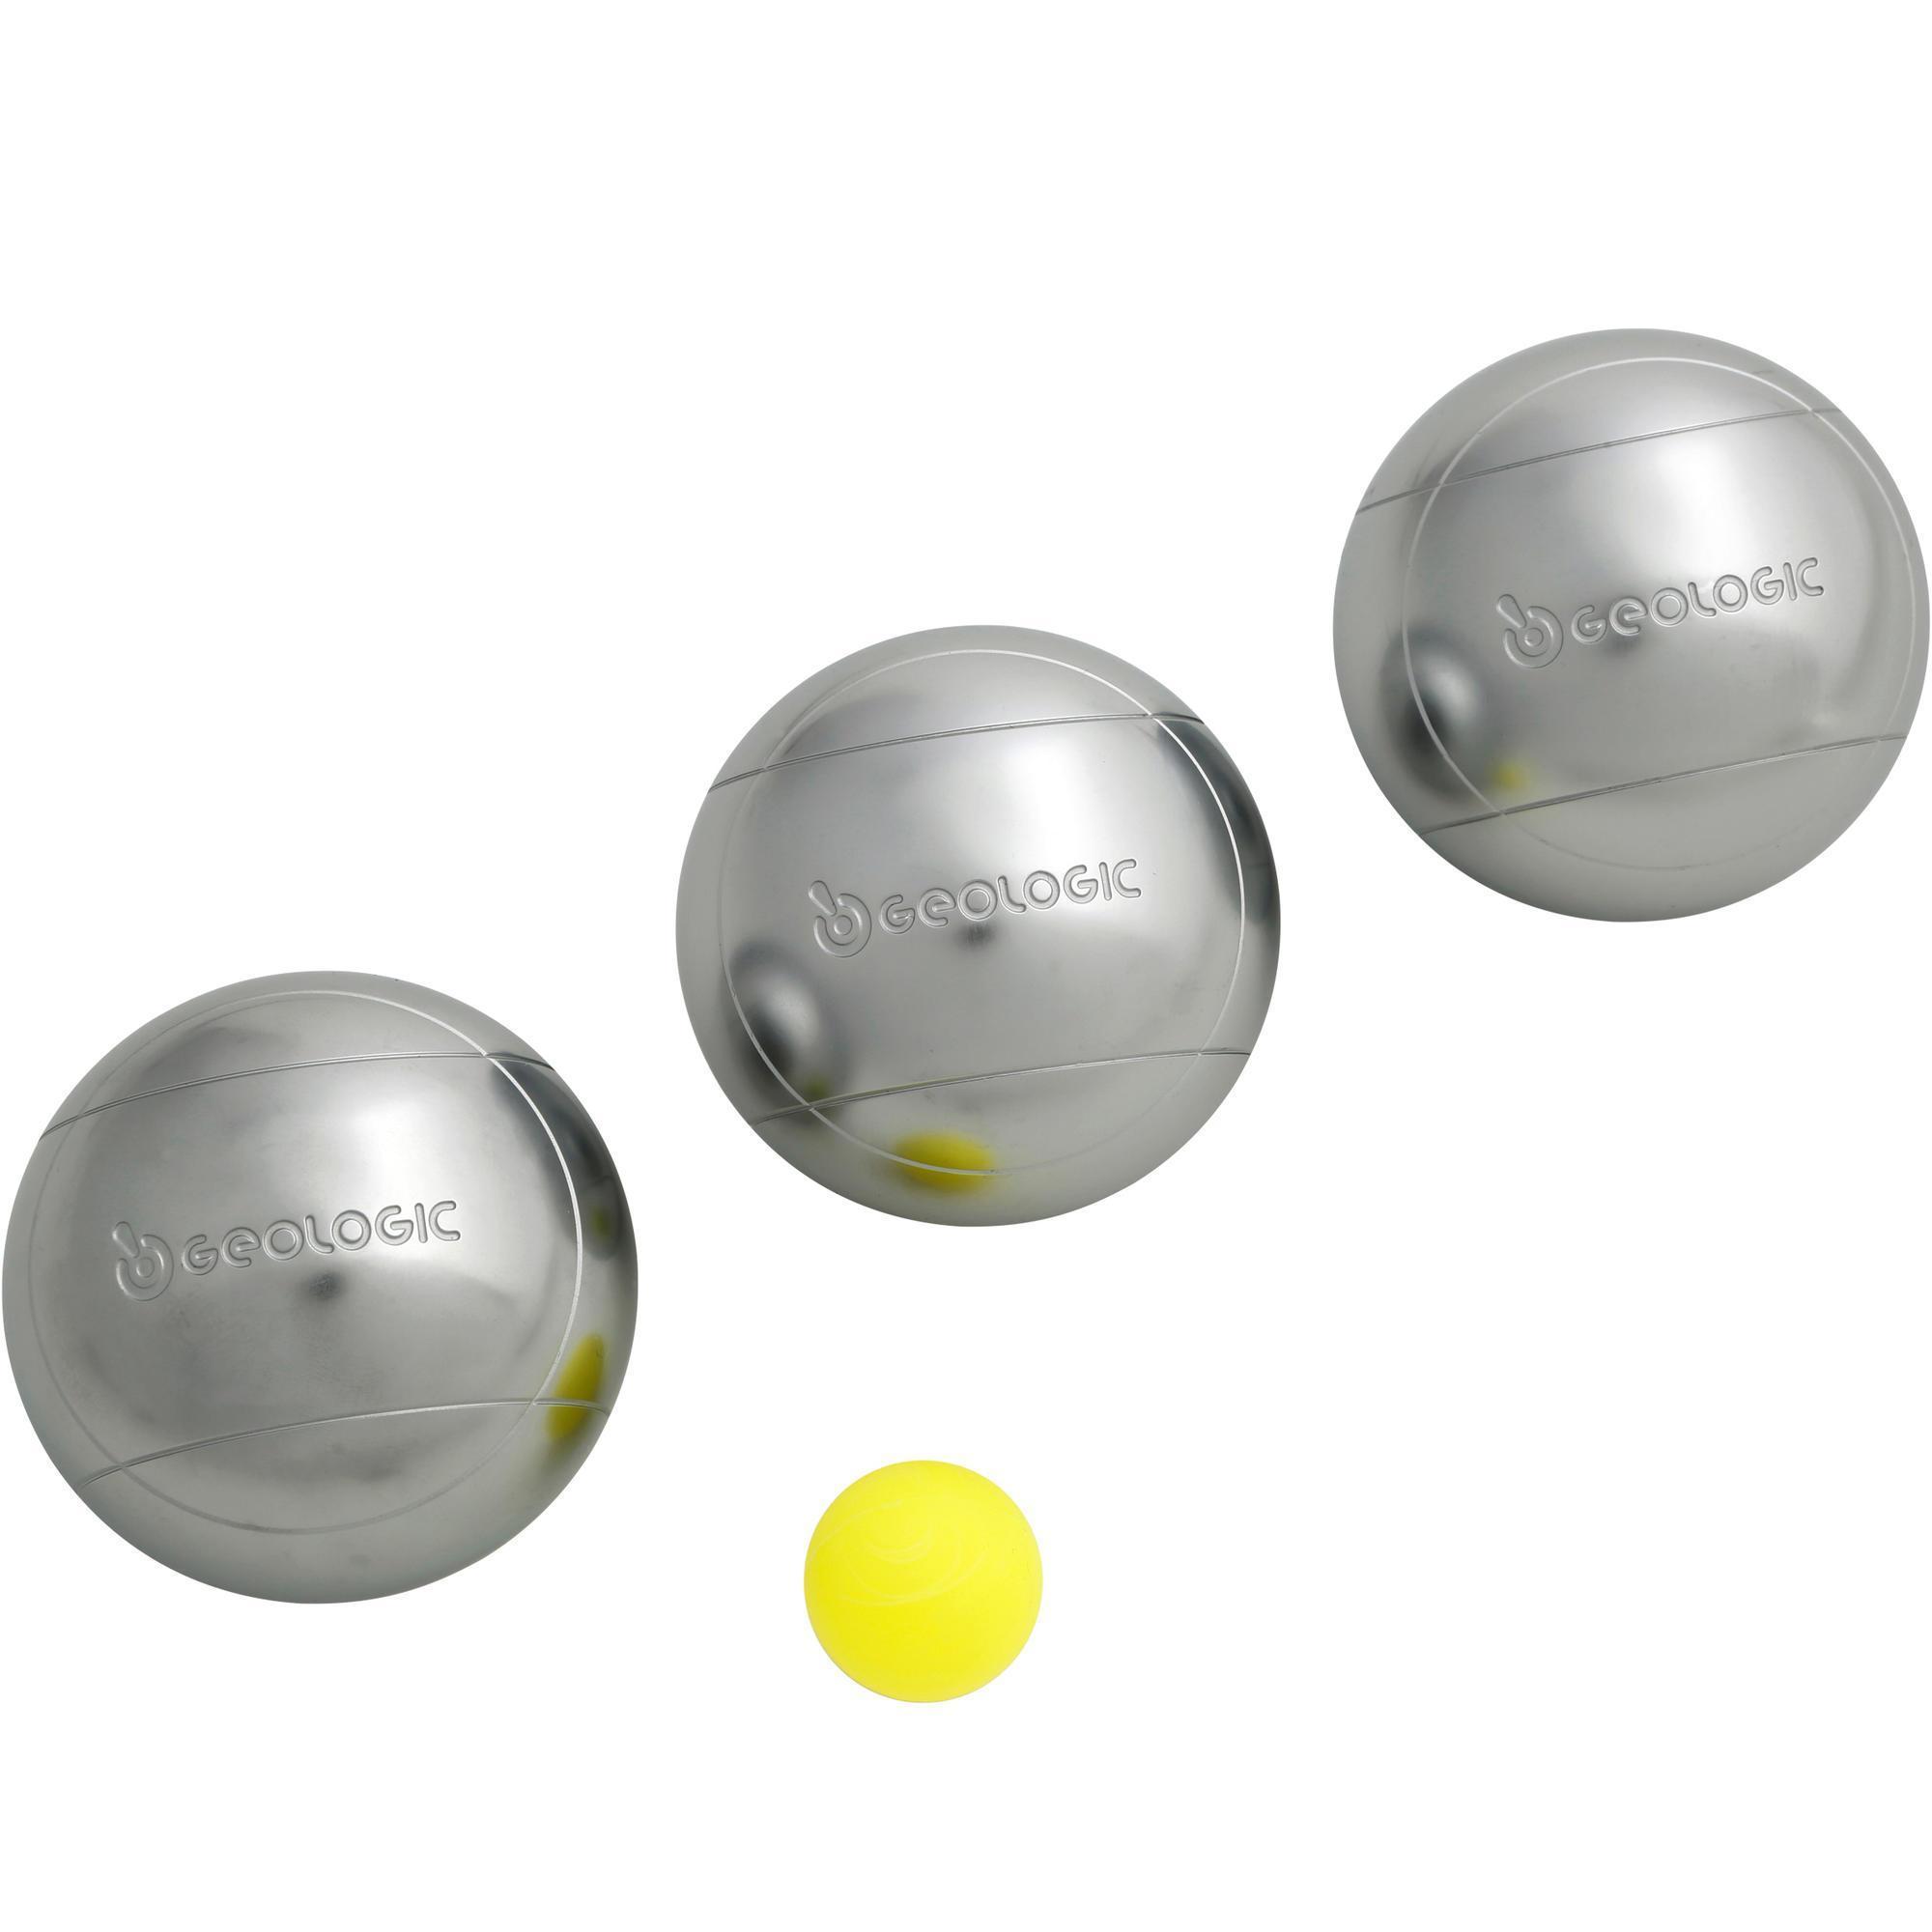 3 Discovery 300 Classic Petanque Boules 